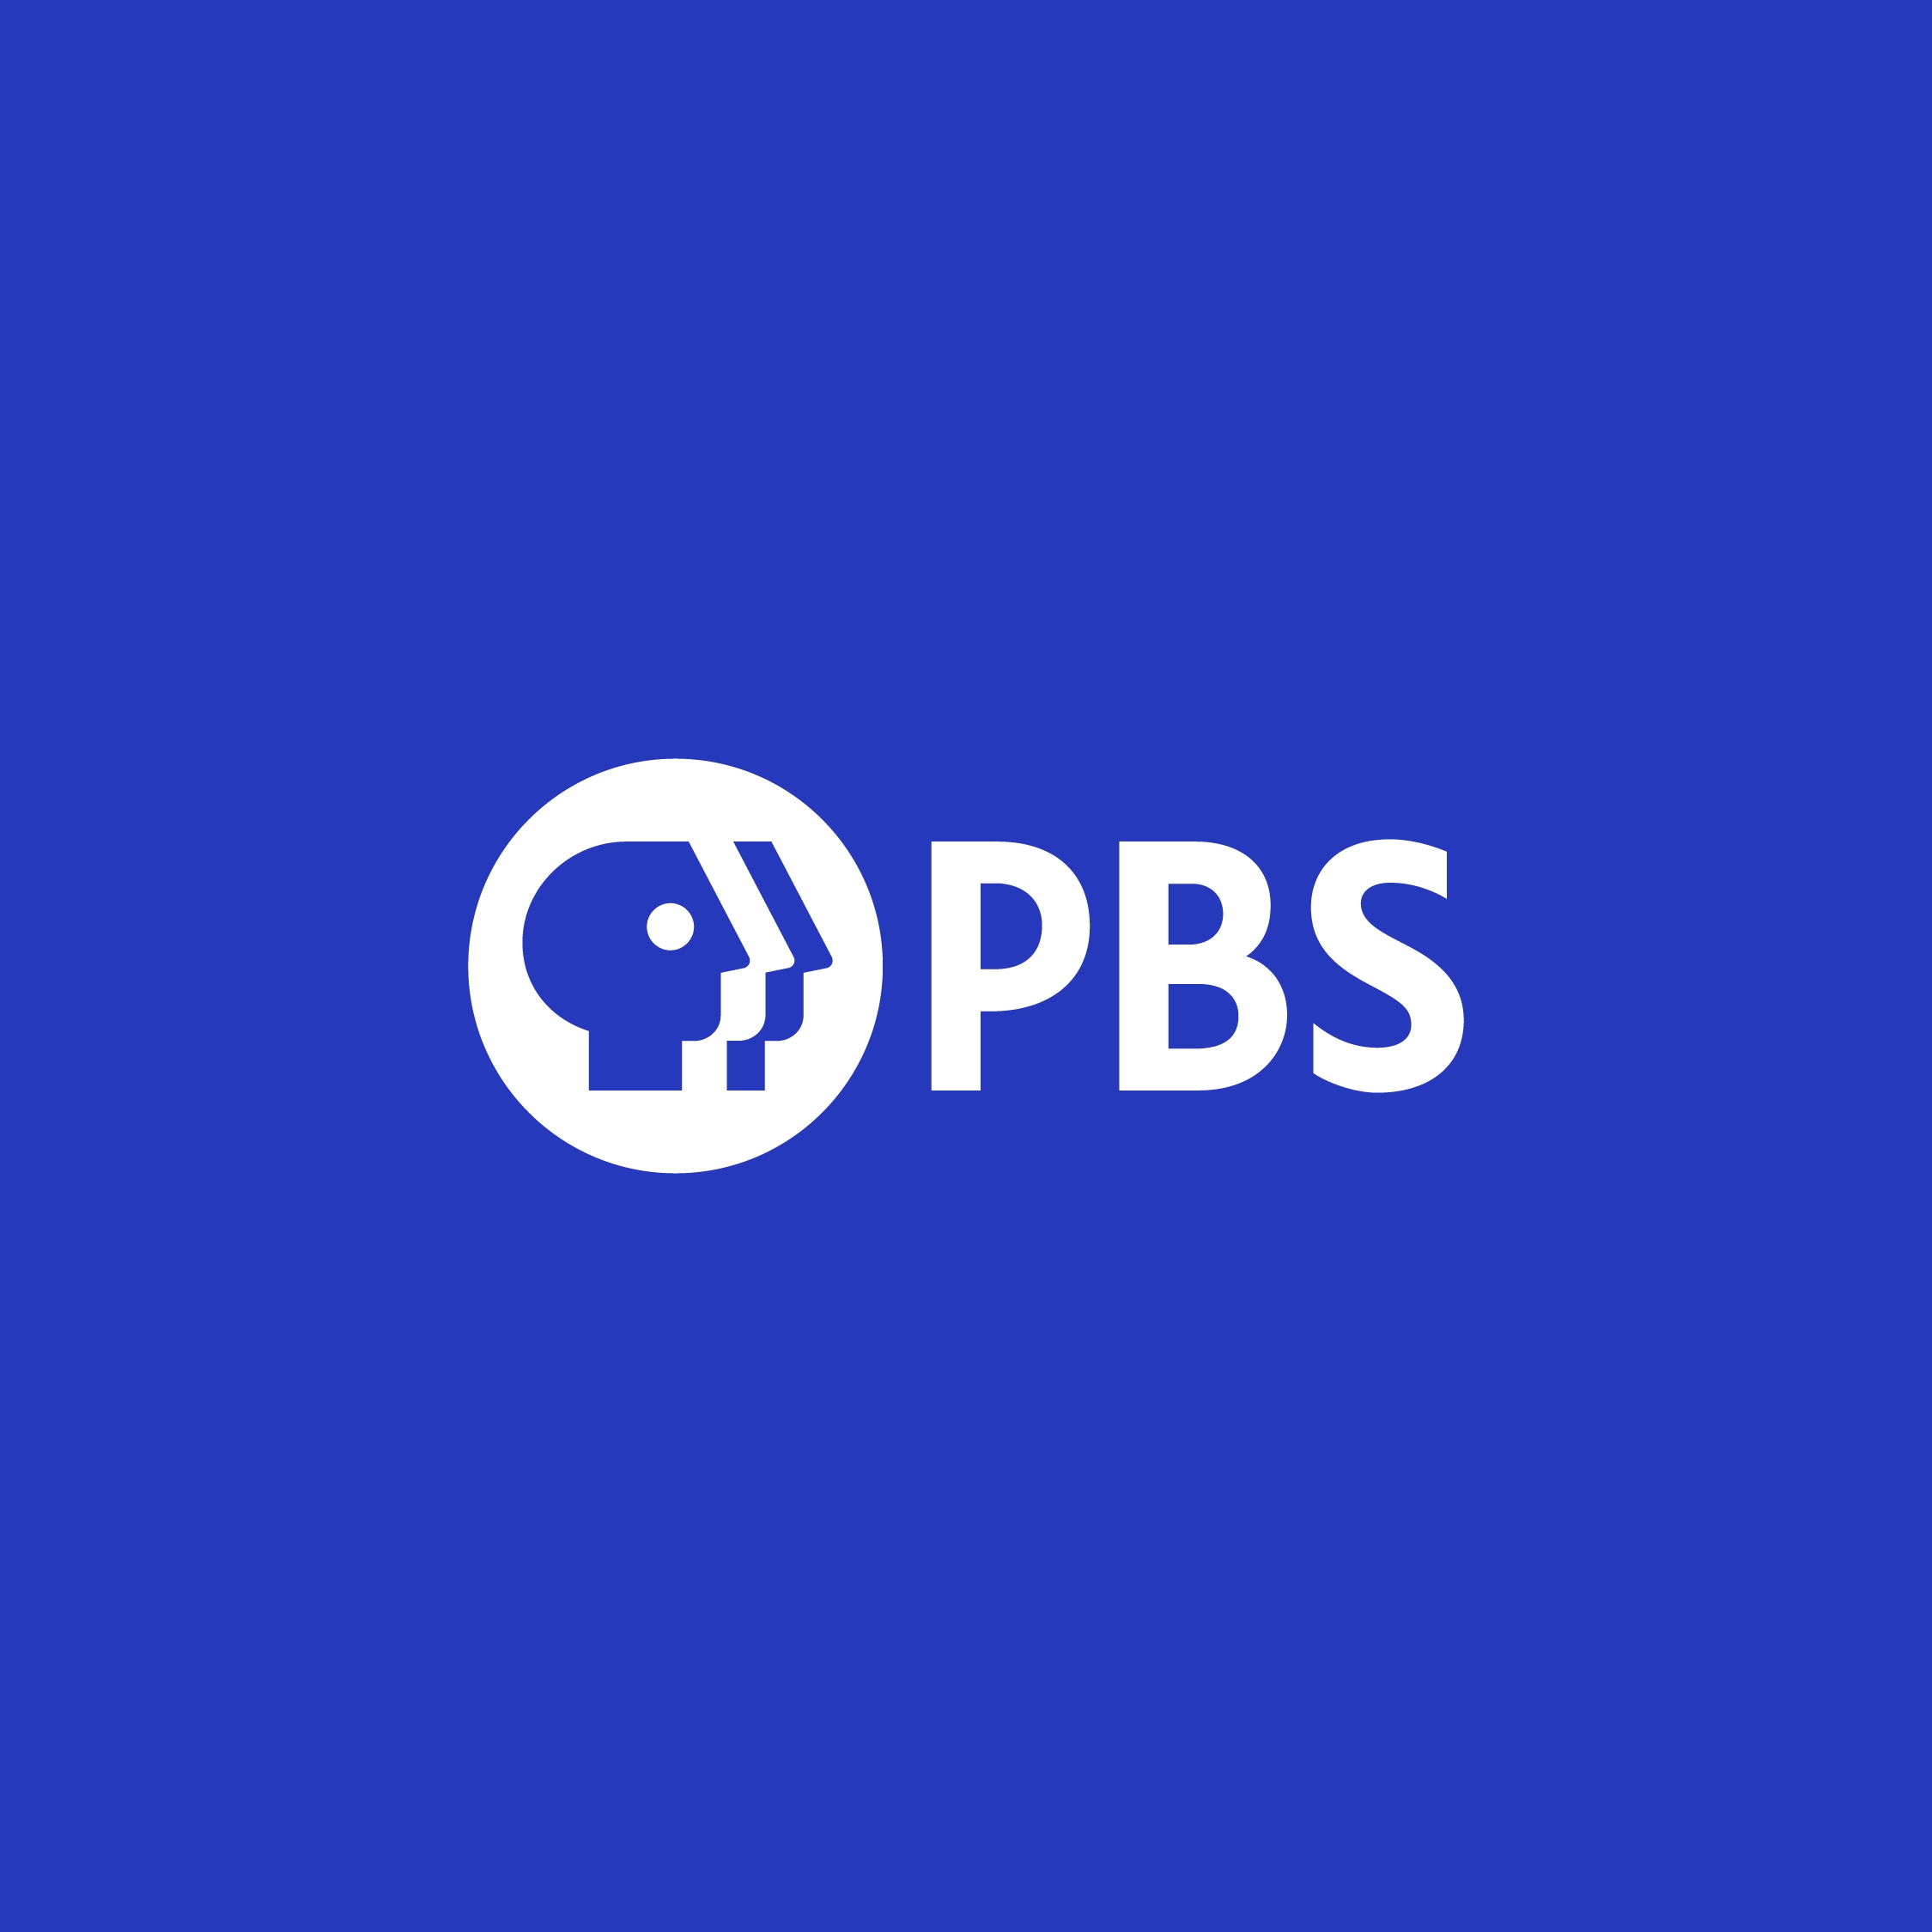 Modernizing a media icon with PBS